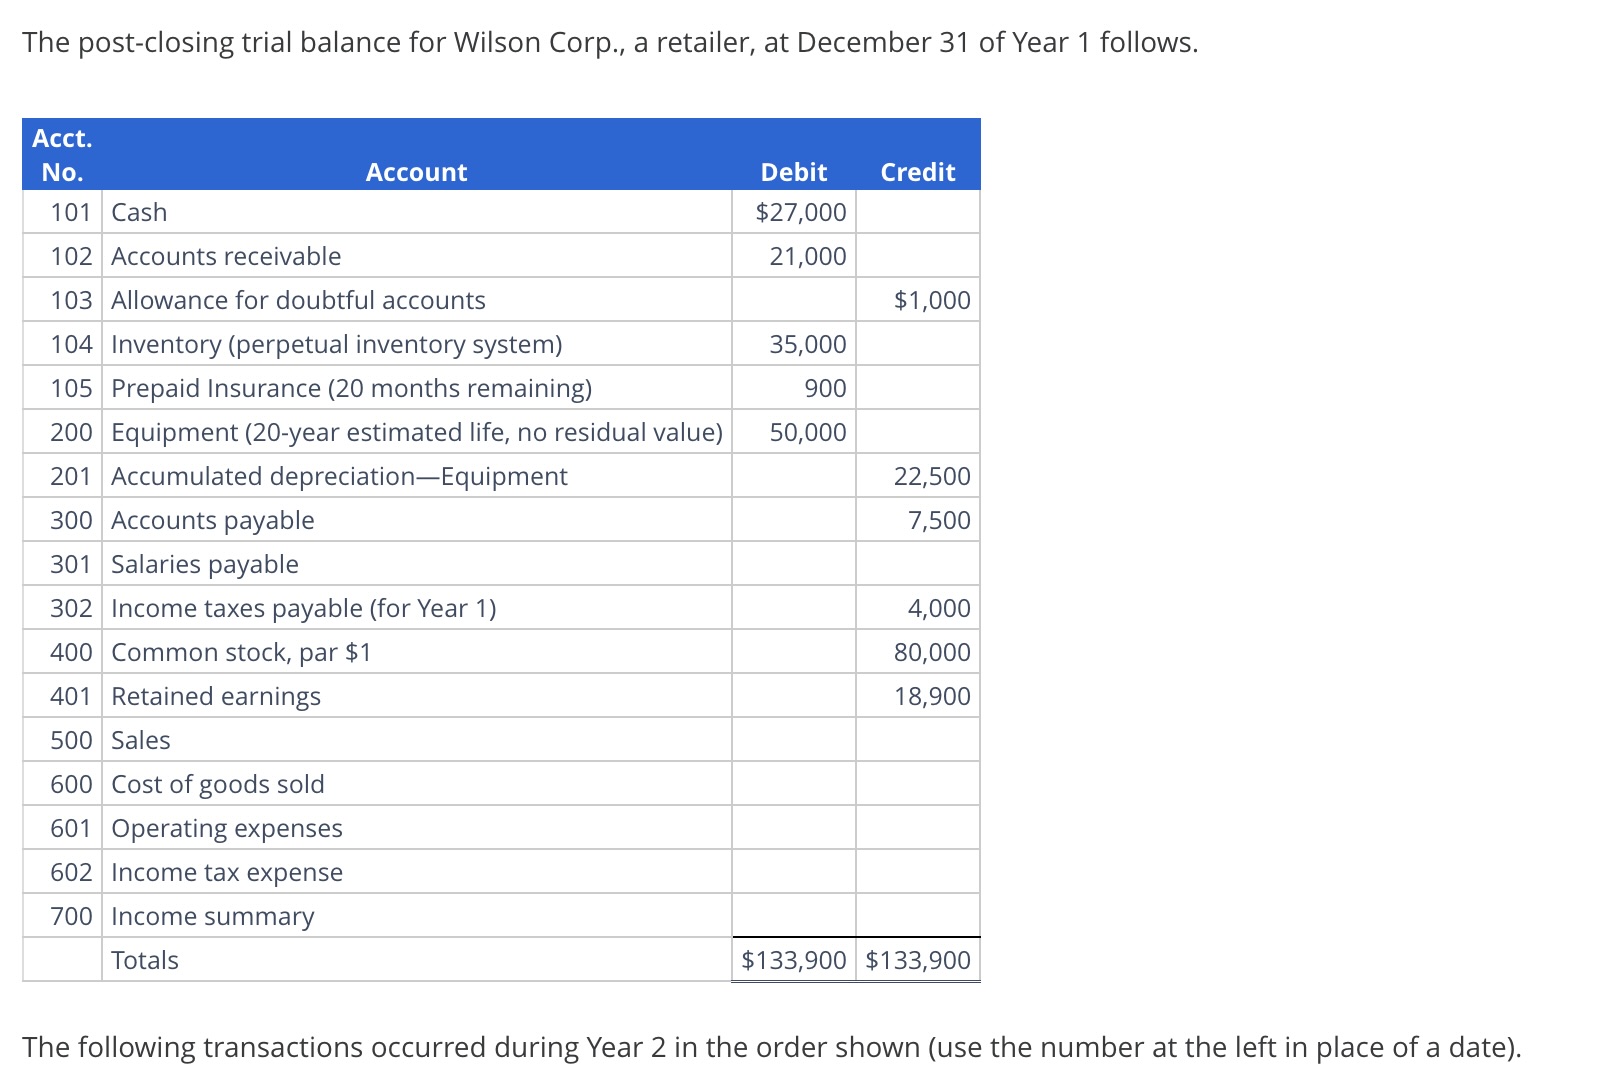 The post-closing trial balance for Wilson Corp., a retailer, at December 31 of Year 1 follows. Acct. No. 101